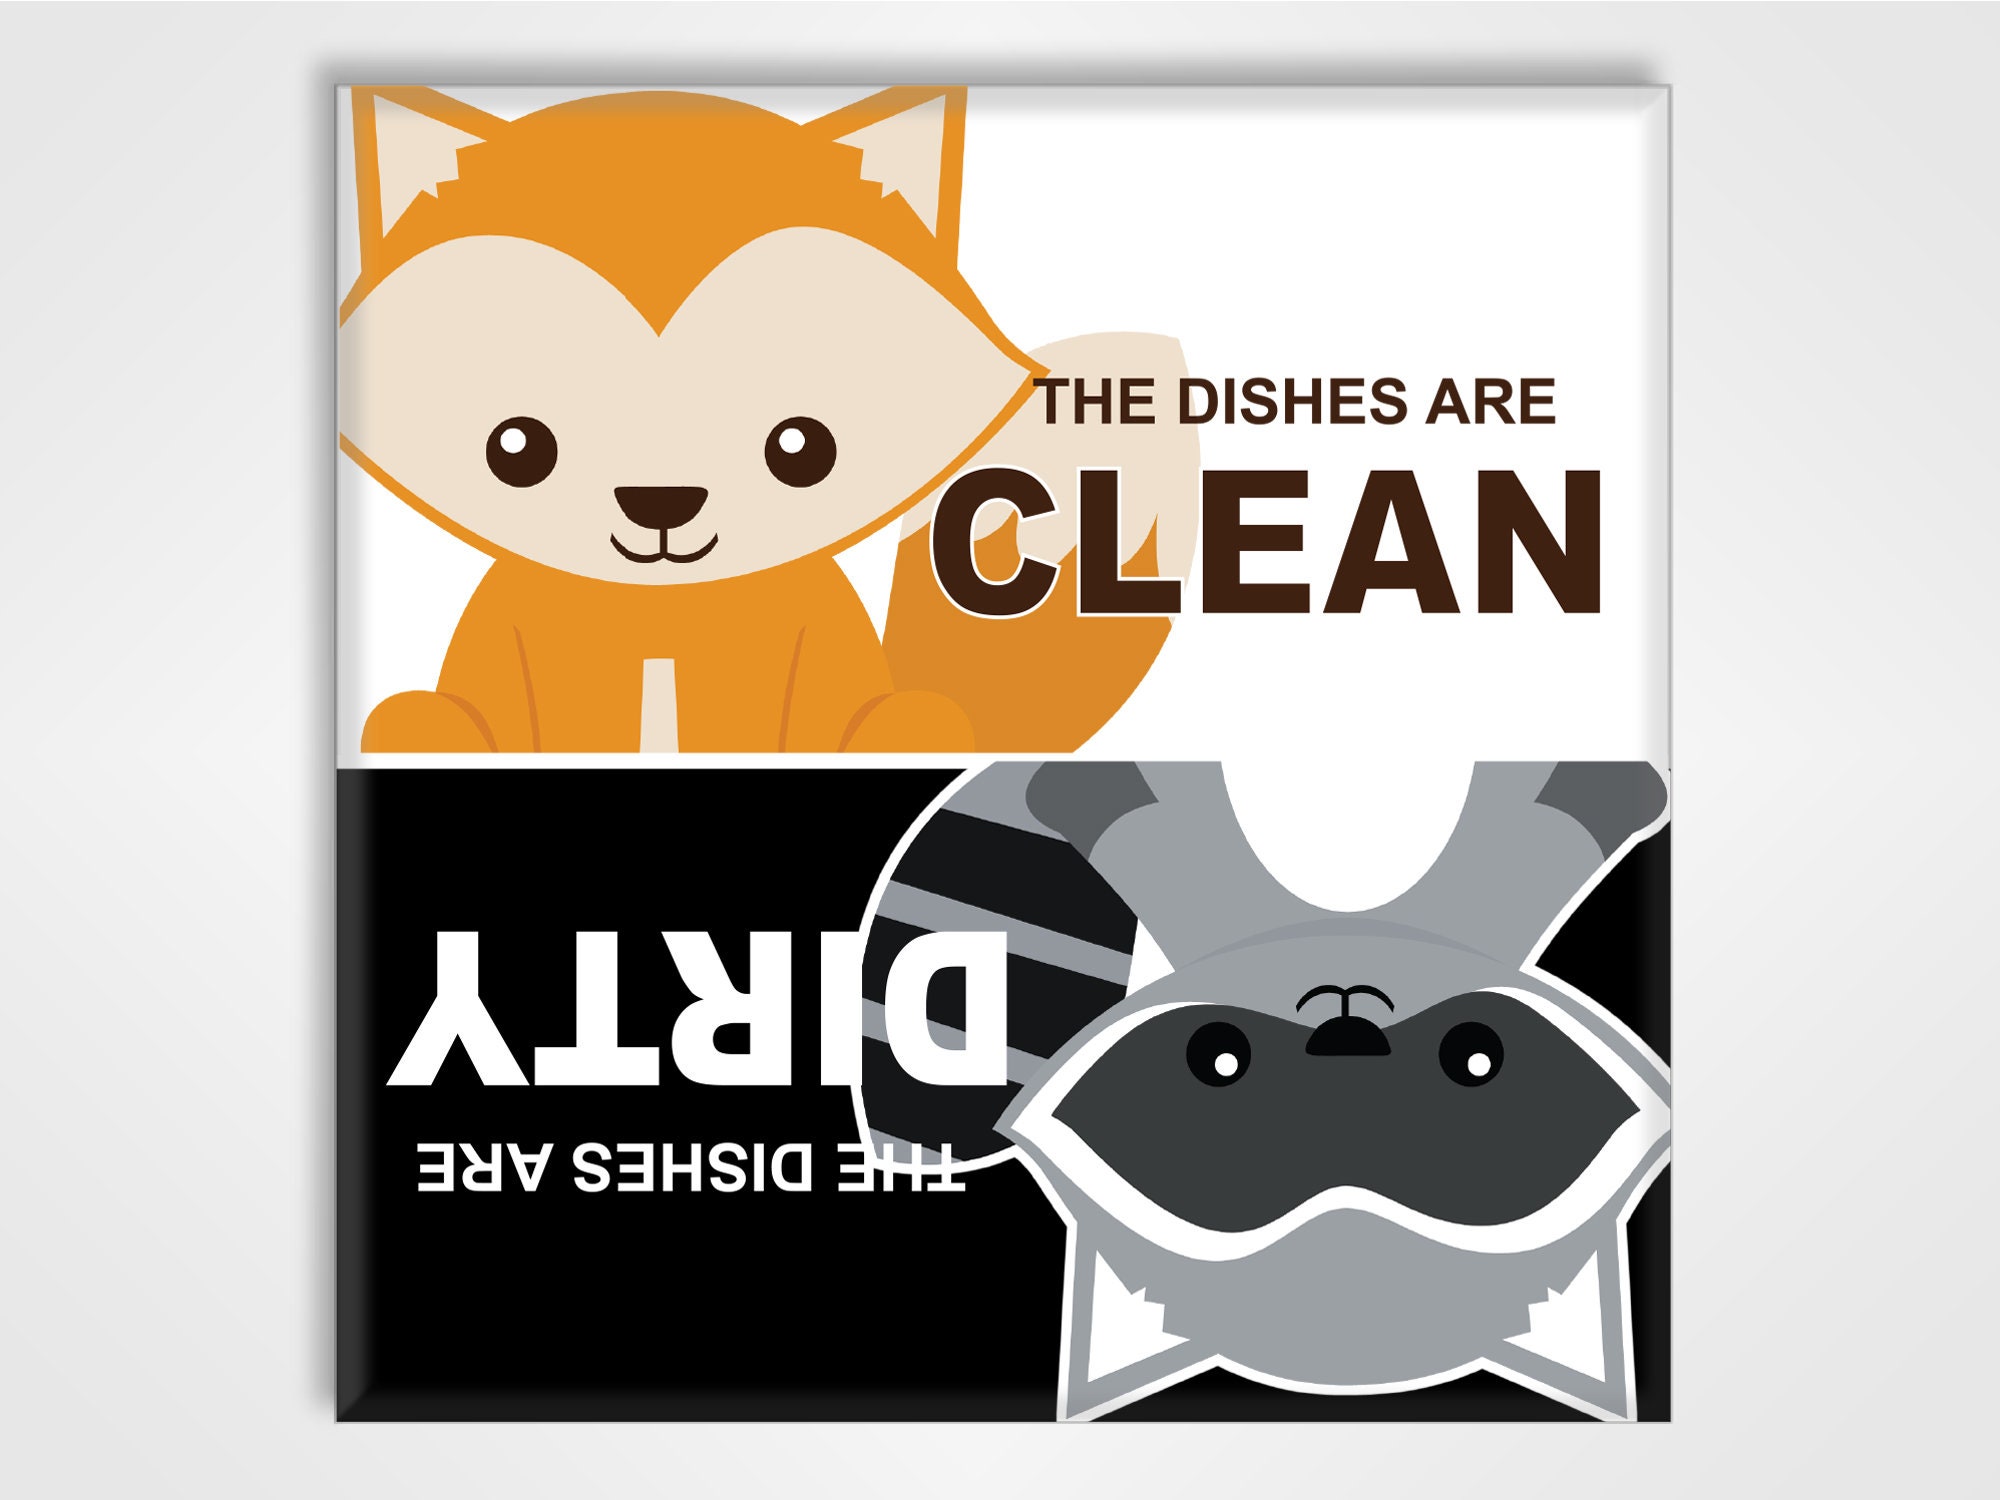 Clean Dirty Dishwasher Magnet Sign Indicator - Funny Magnetic Yes Wait  Design